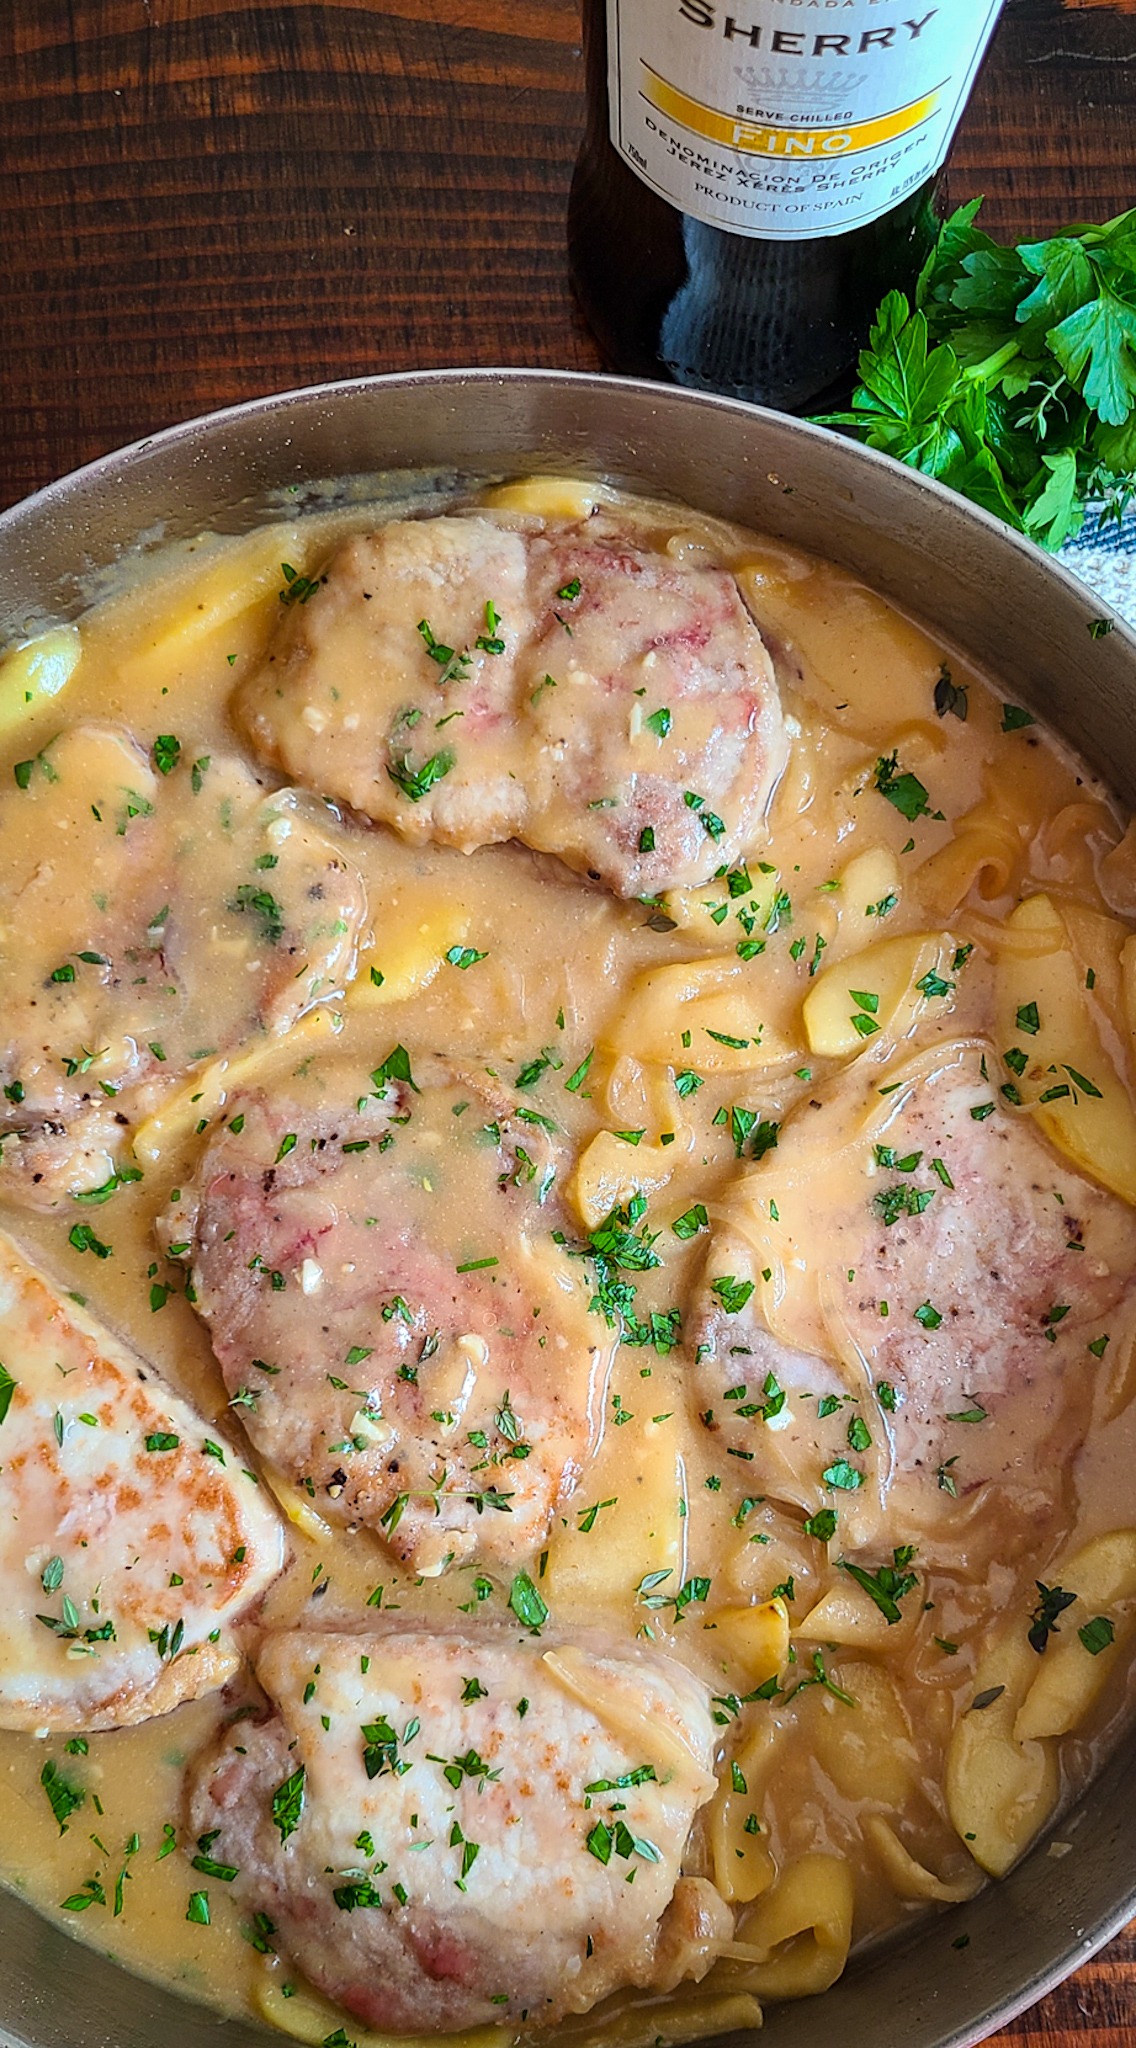 Pork Chops with Apples and Sherry-Cider Sauce